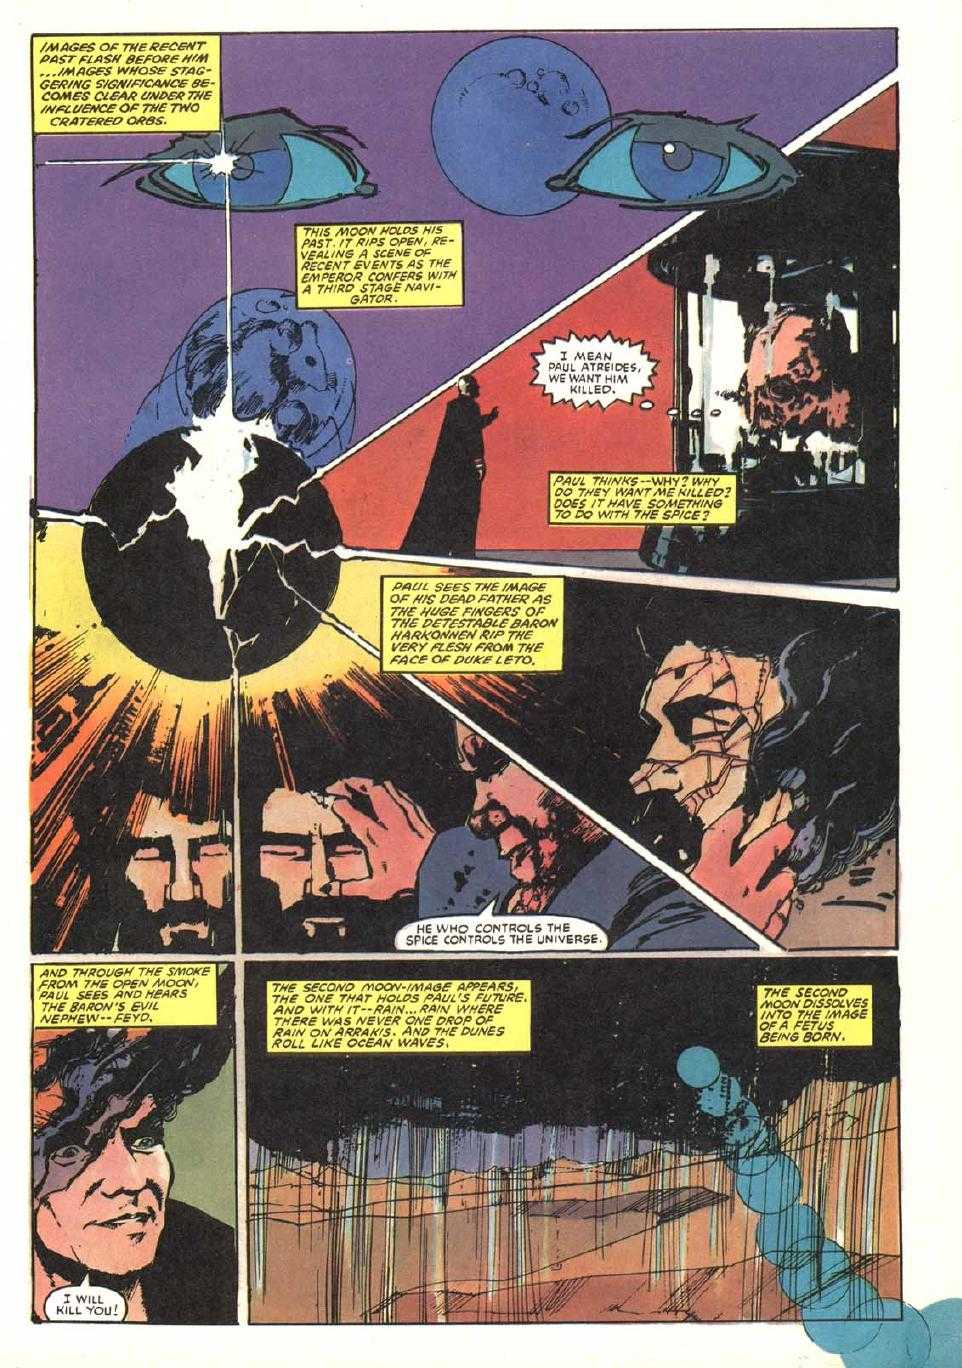 'Dune: The Official Comic Book' page 33 from Marvel Comics. 